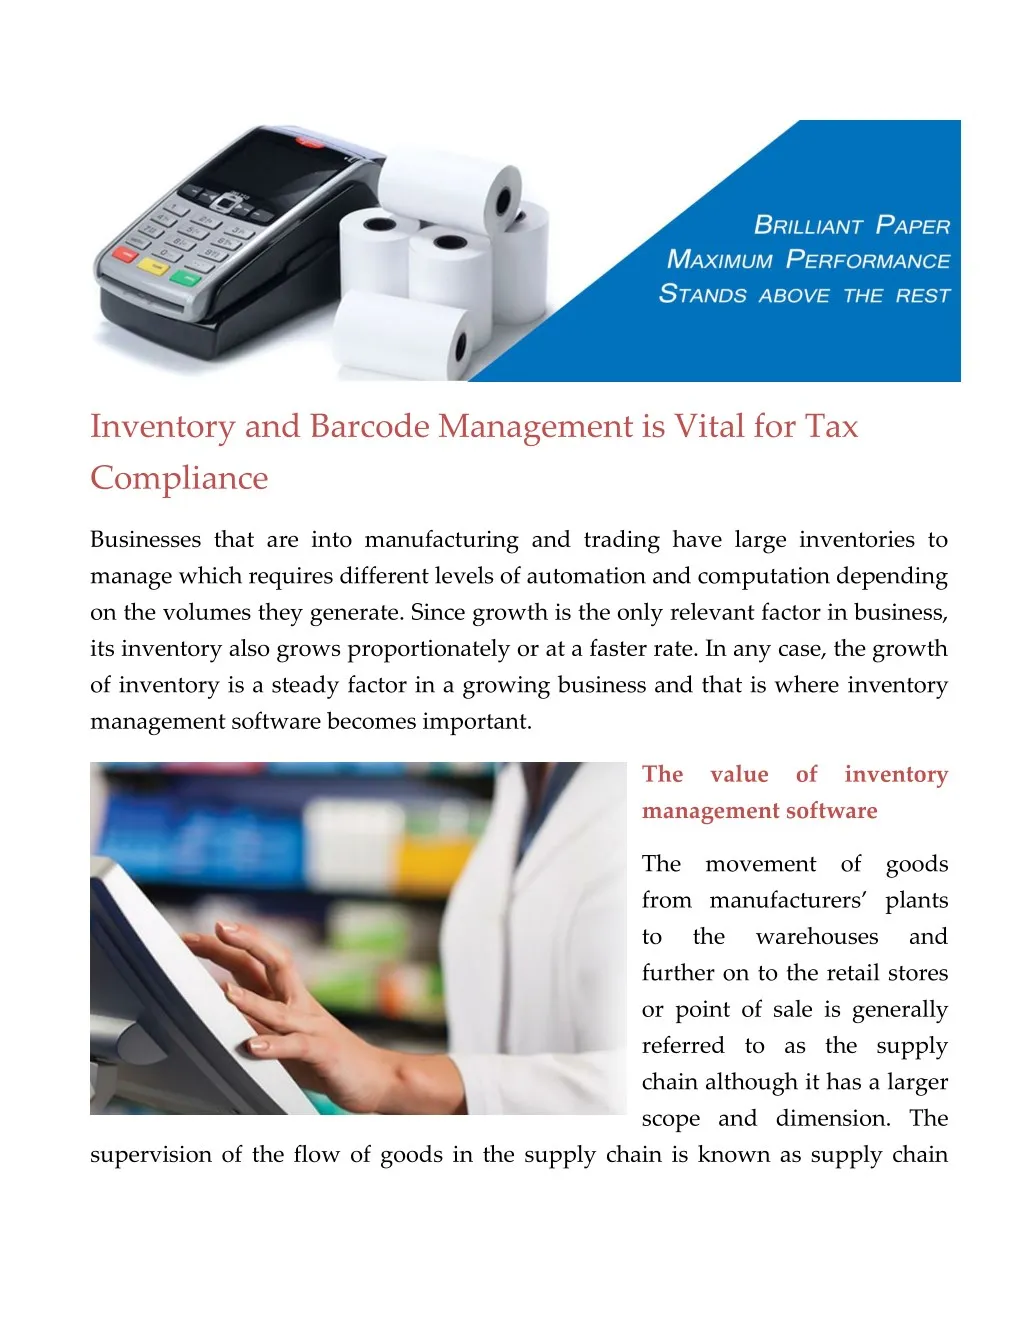 inventory and barcode management is vital for tax